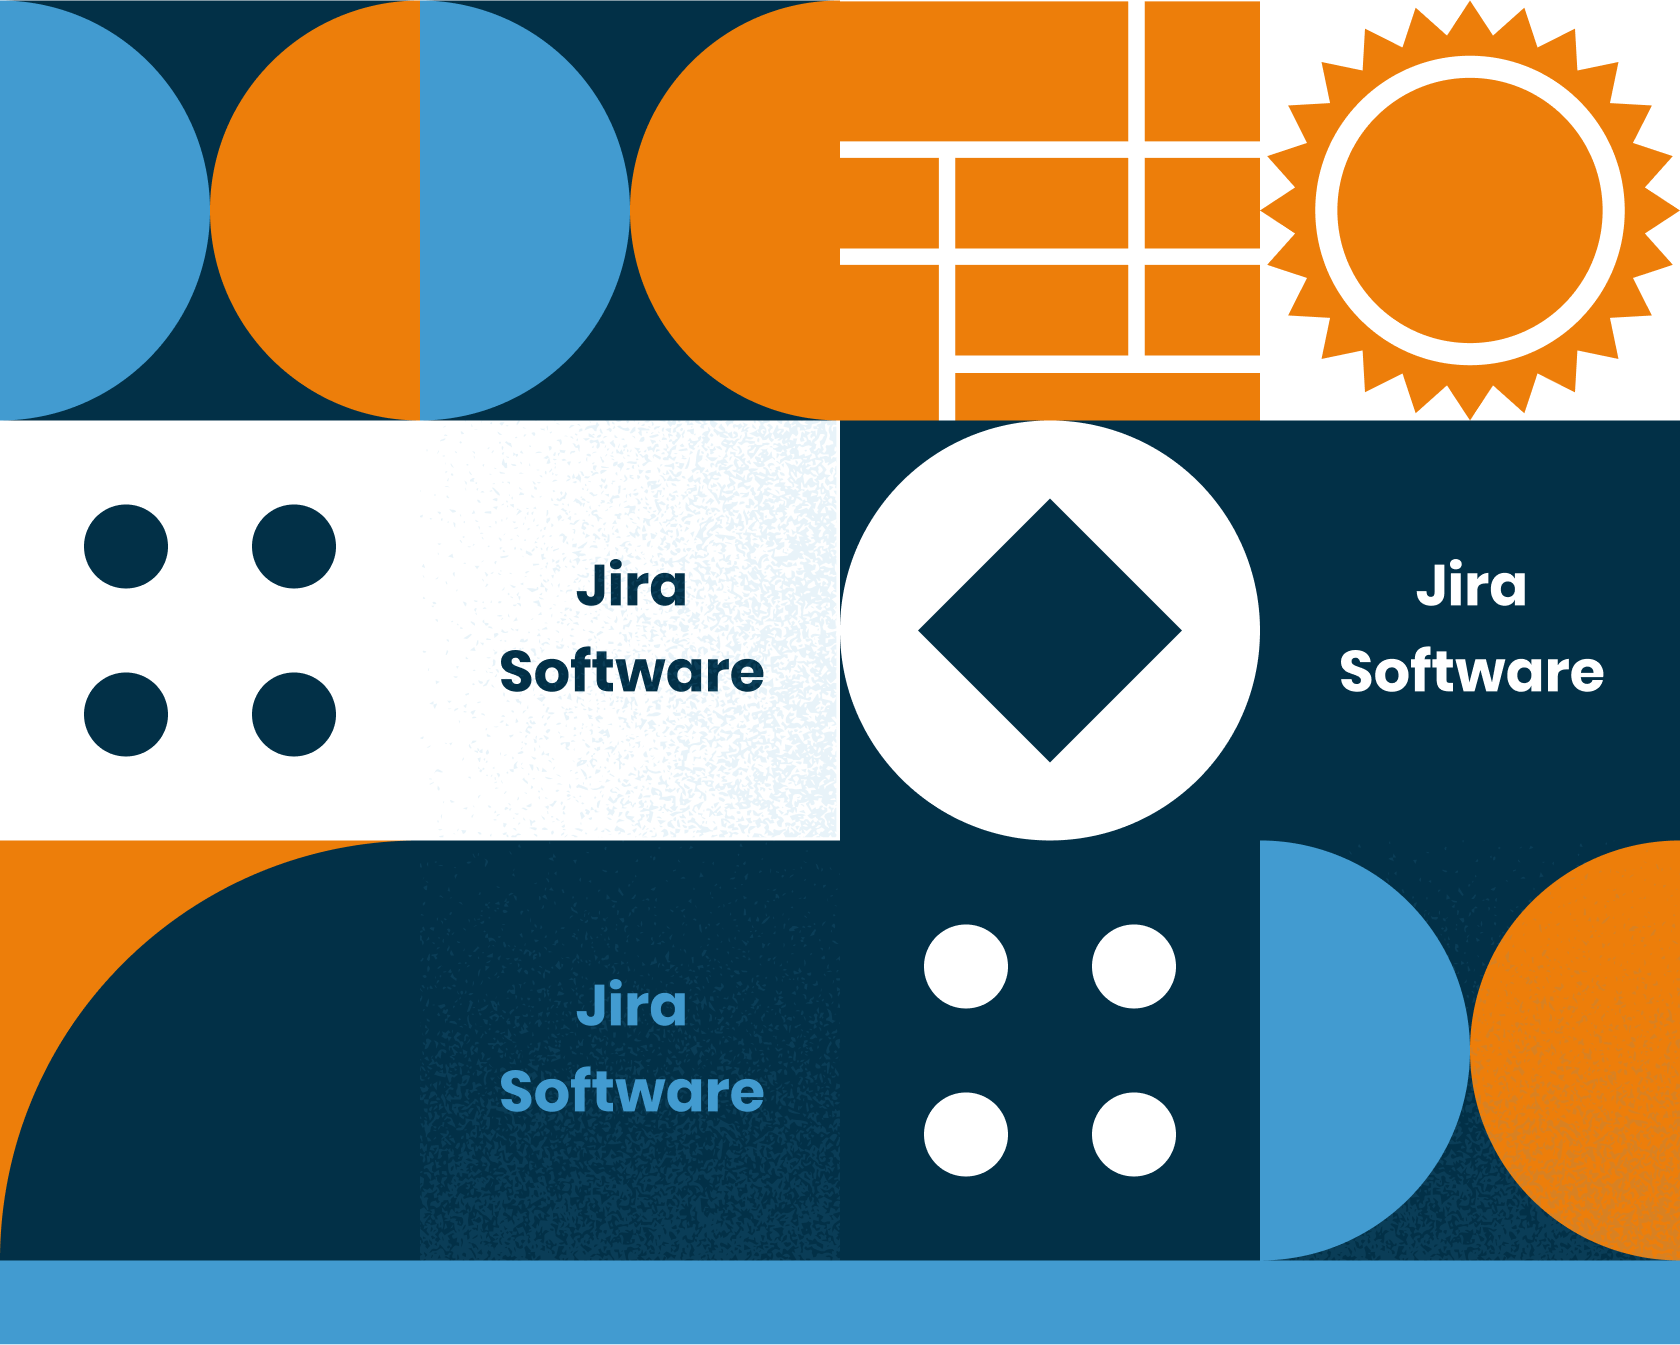 A team using Jira Software to manage and track a project from start to finish